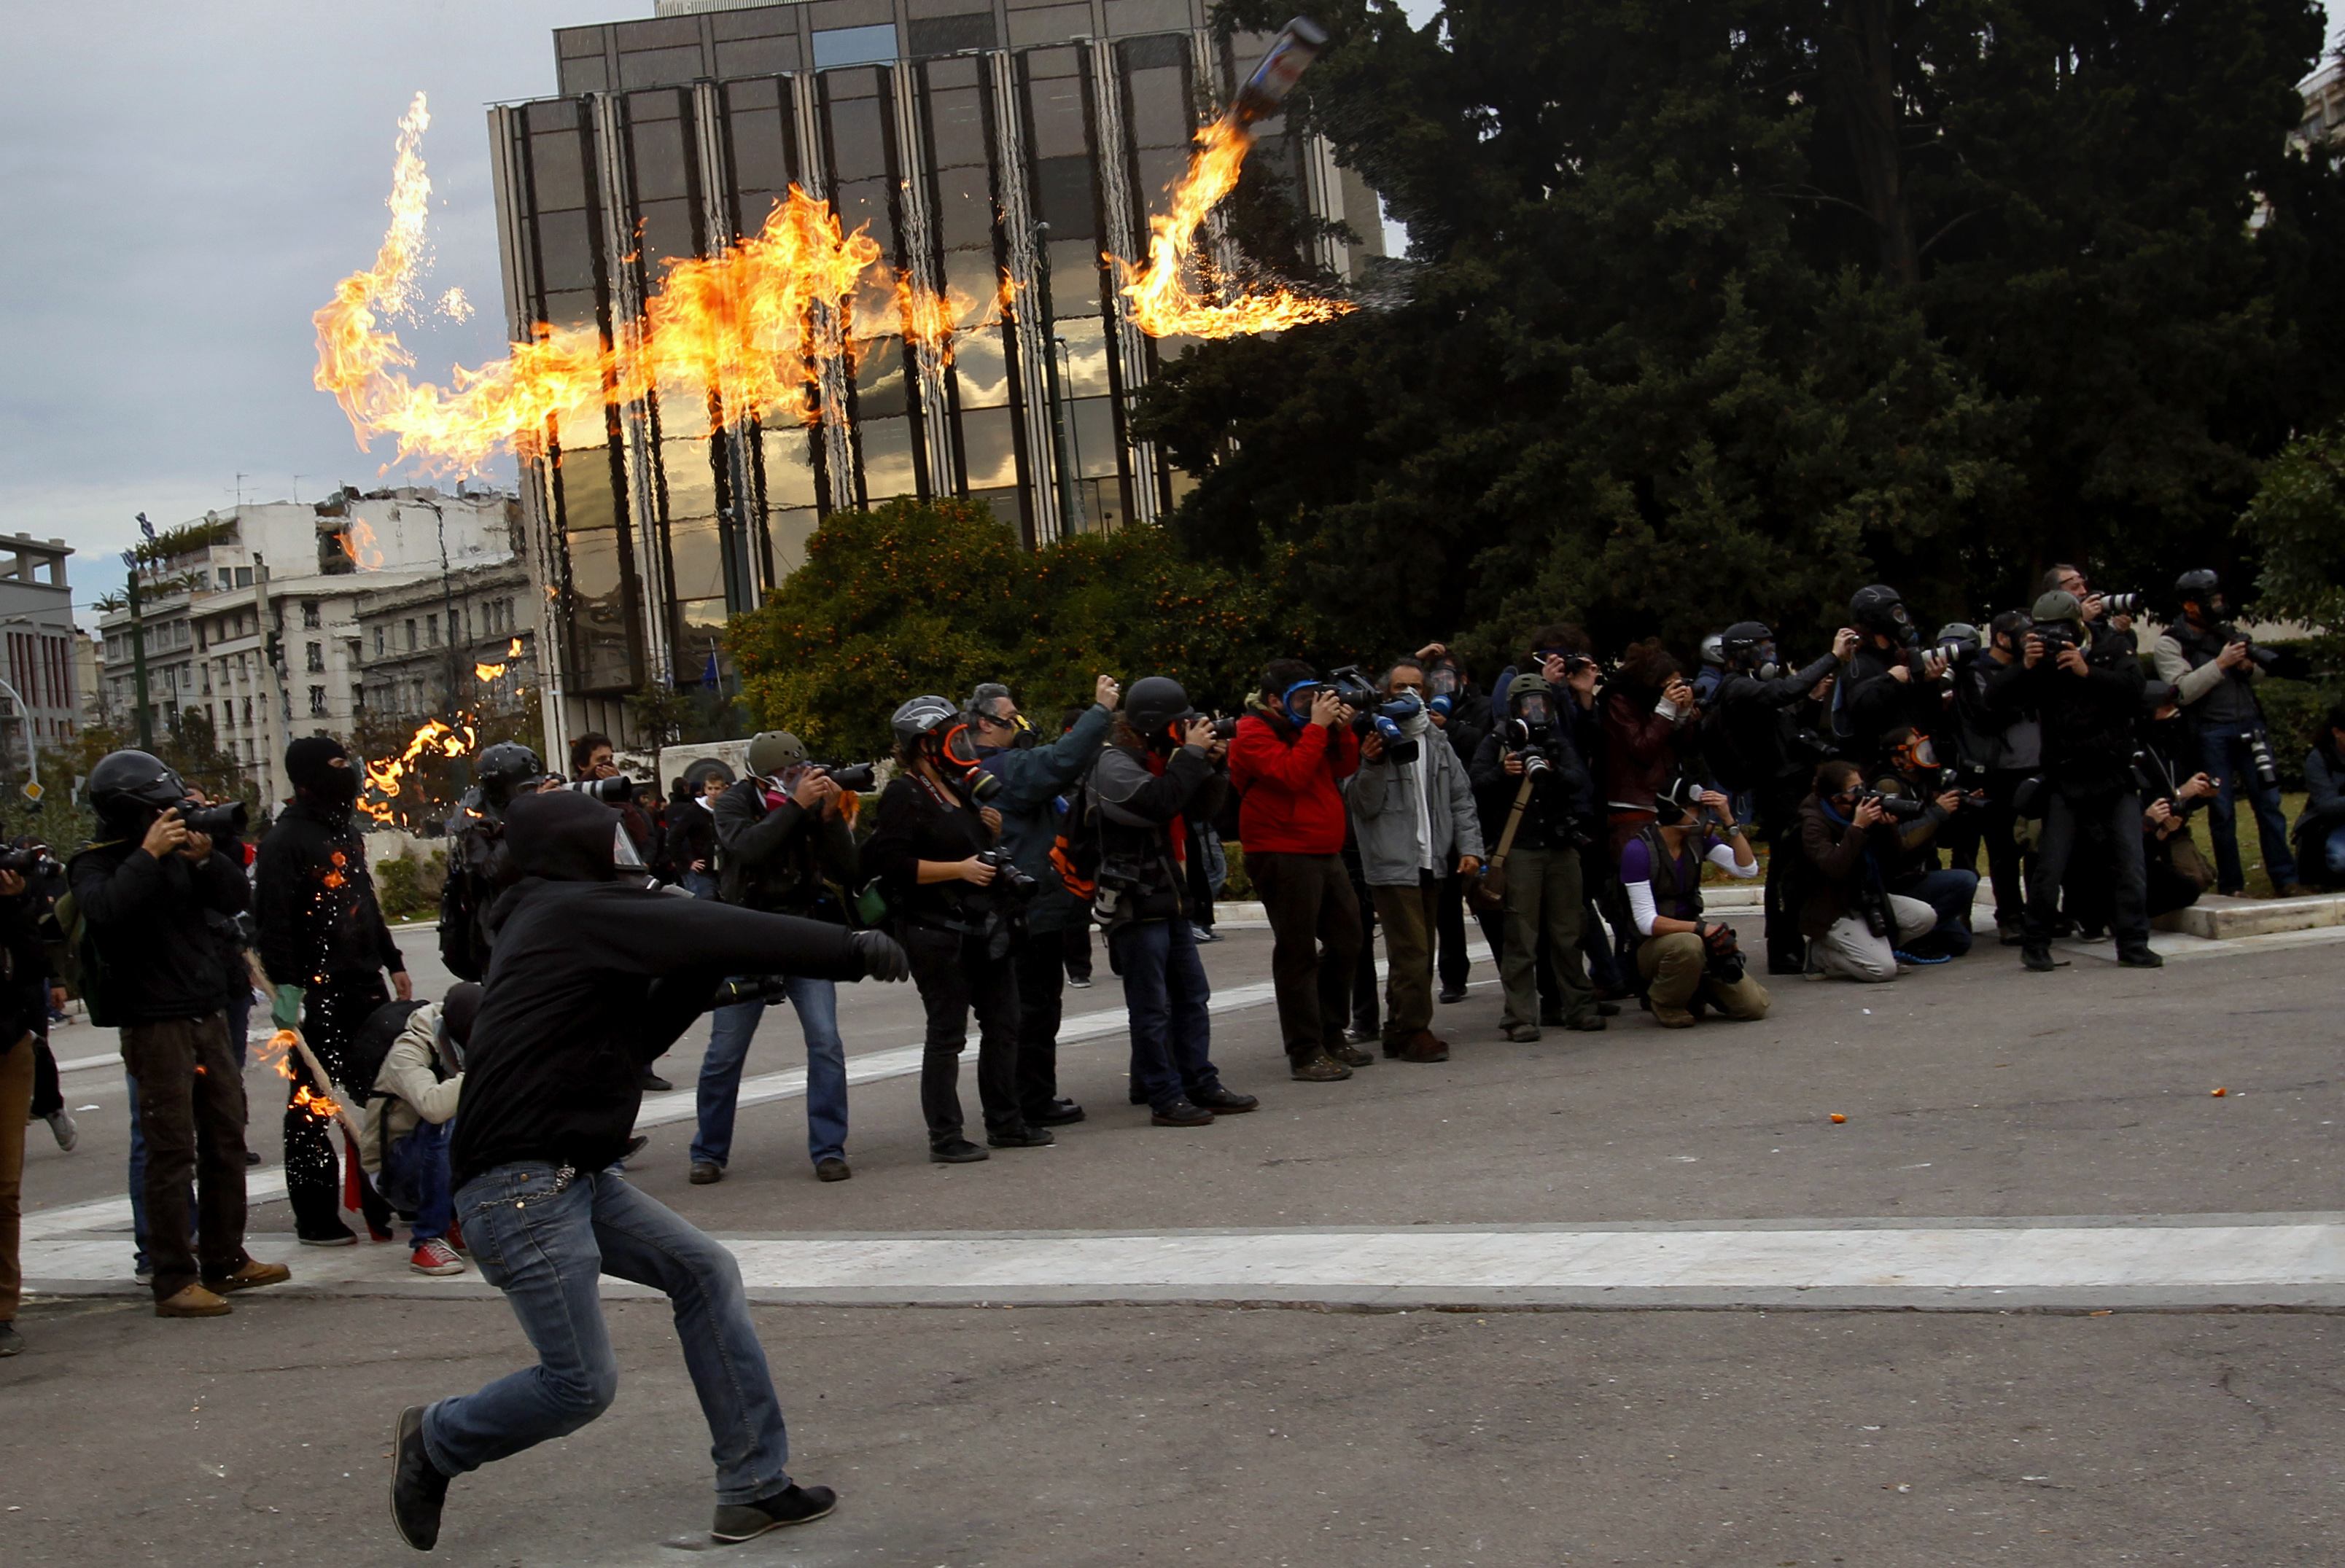 A masked youth throws a petrol bomb at police in Athens' Syntagma (Constitution) square during clashes